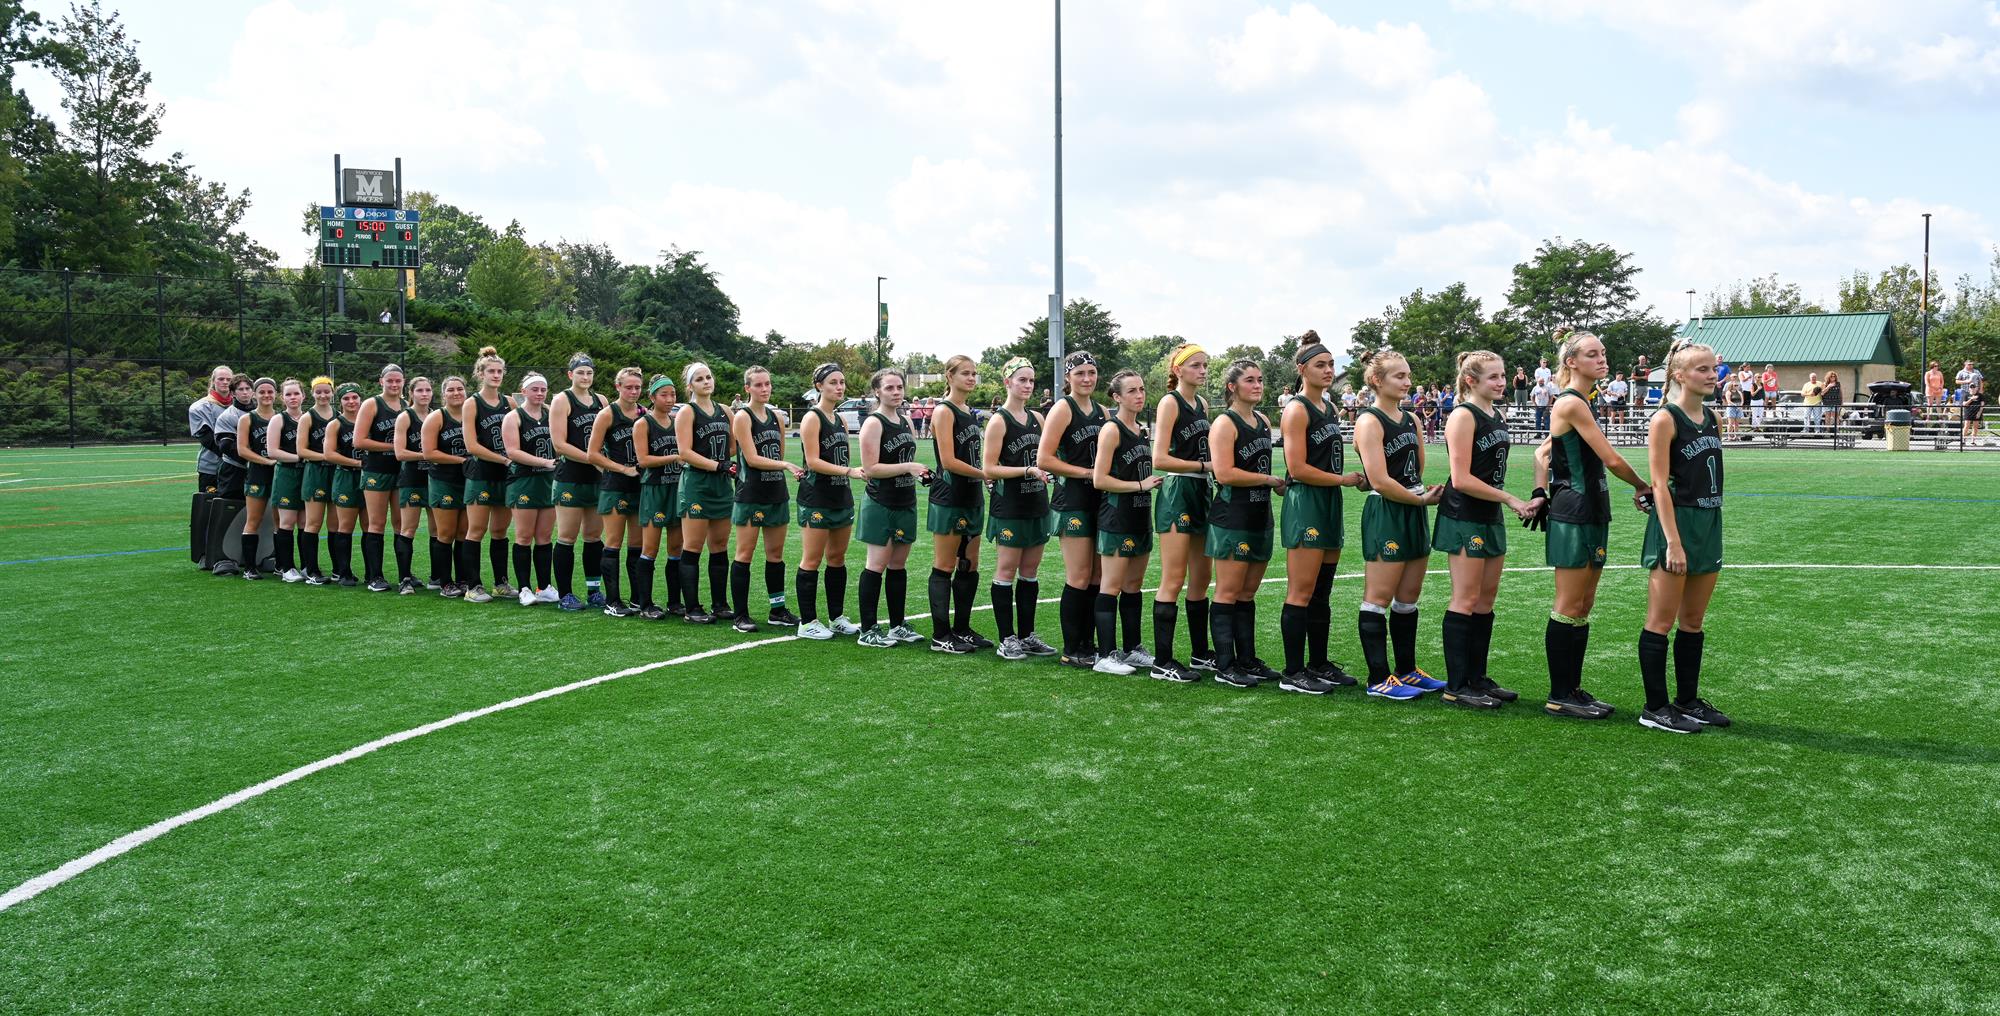 Marywood field hockey lines up before a game in black and green uniforms.